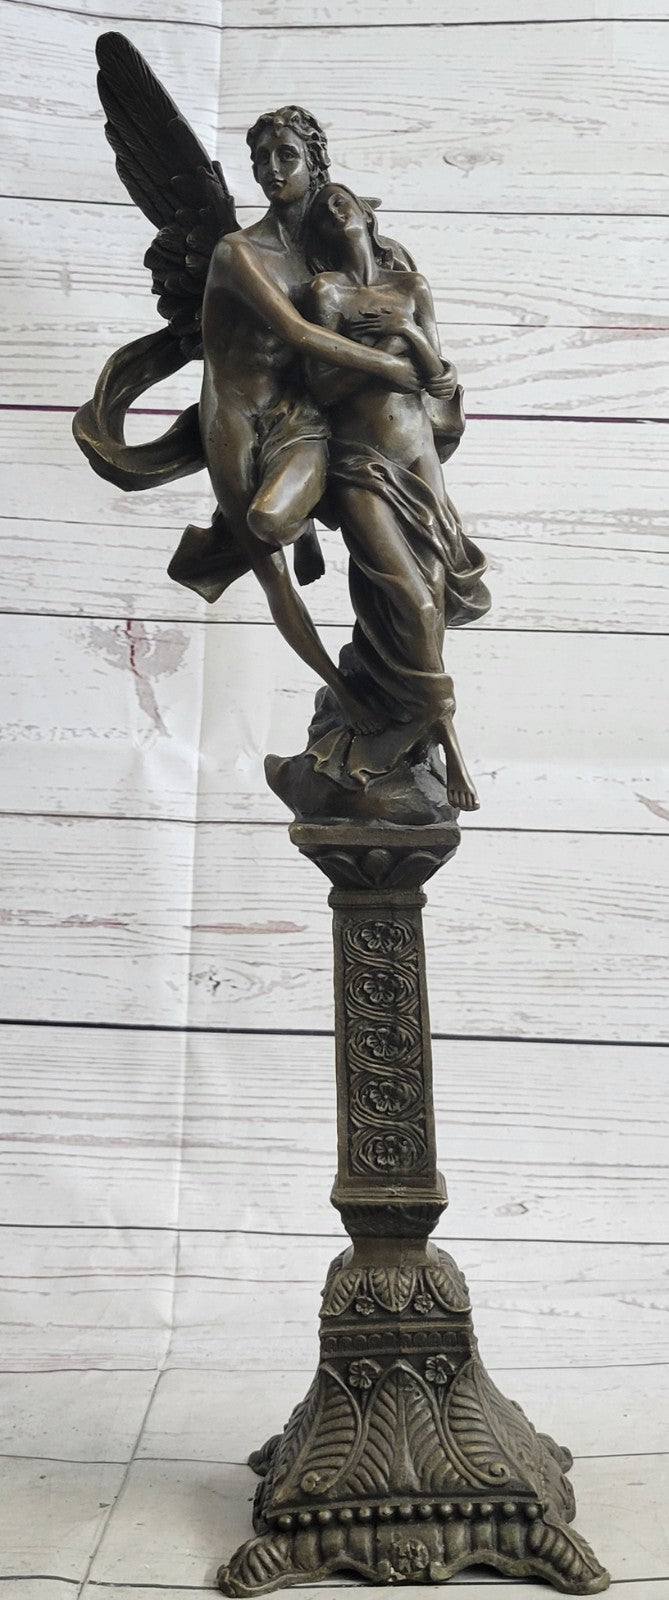 Tall Nude Male Angel Carries Girl Bronze Sculpture Art Nouveau Mythical Deco